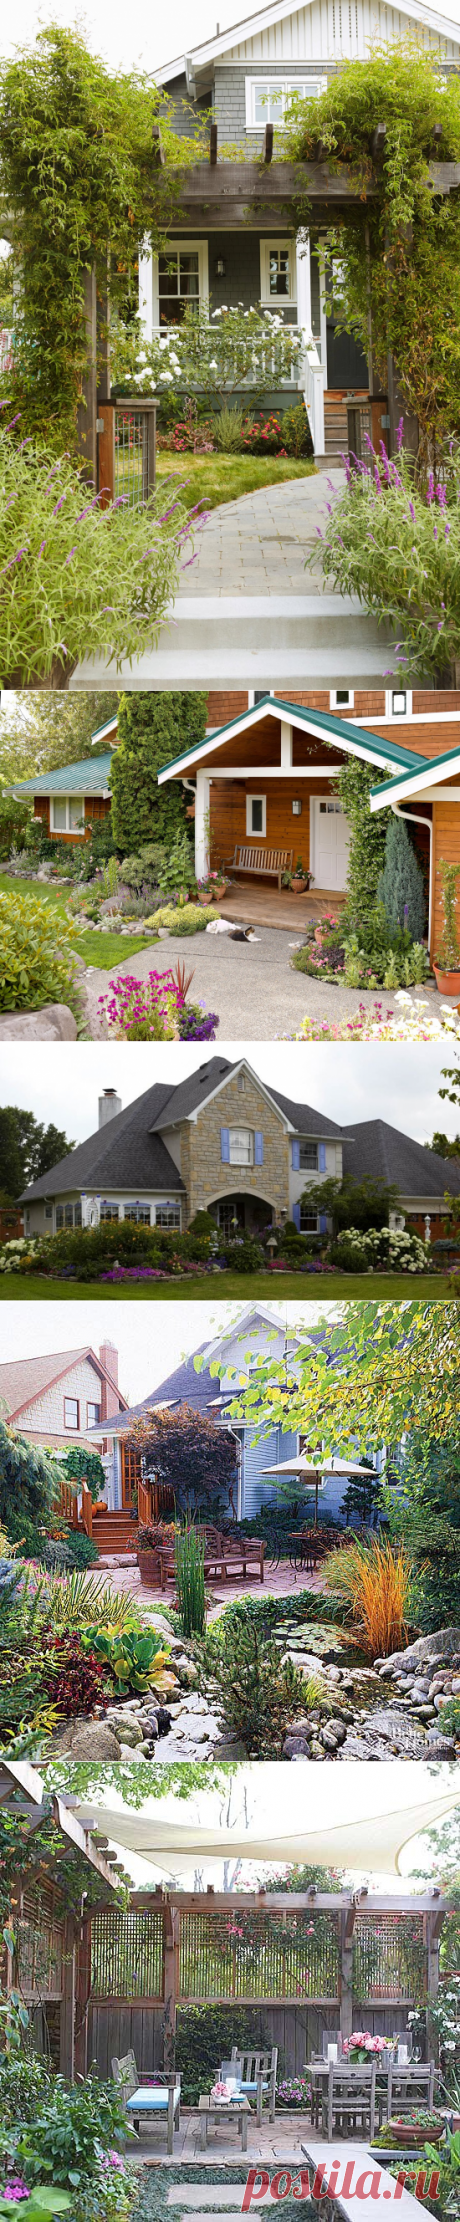 Simple Front Yard Landscaping Ideas | Better Homes & Gardens